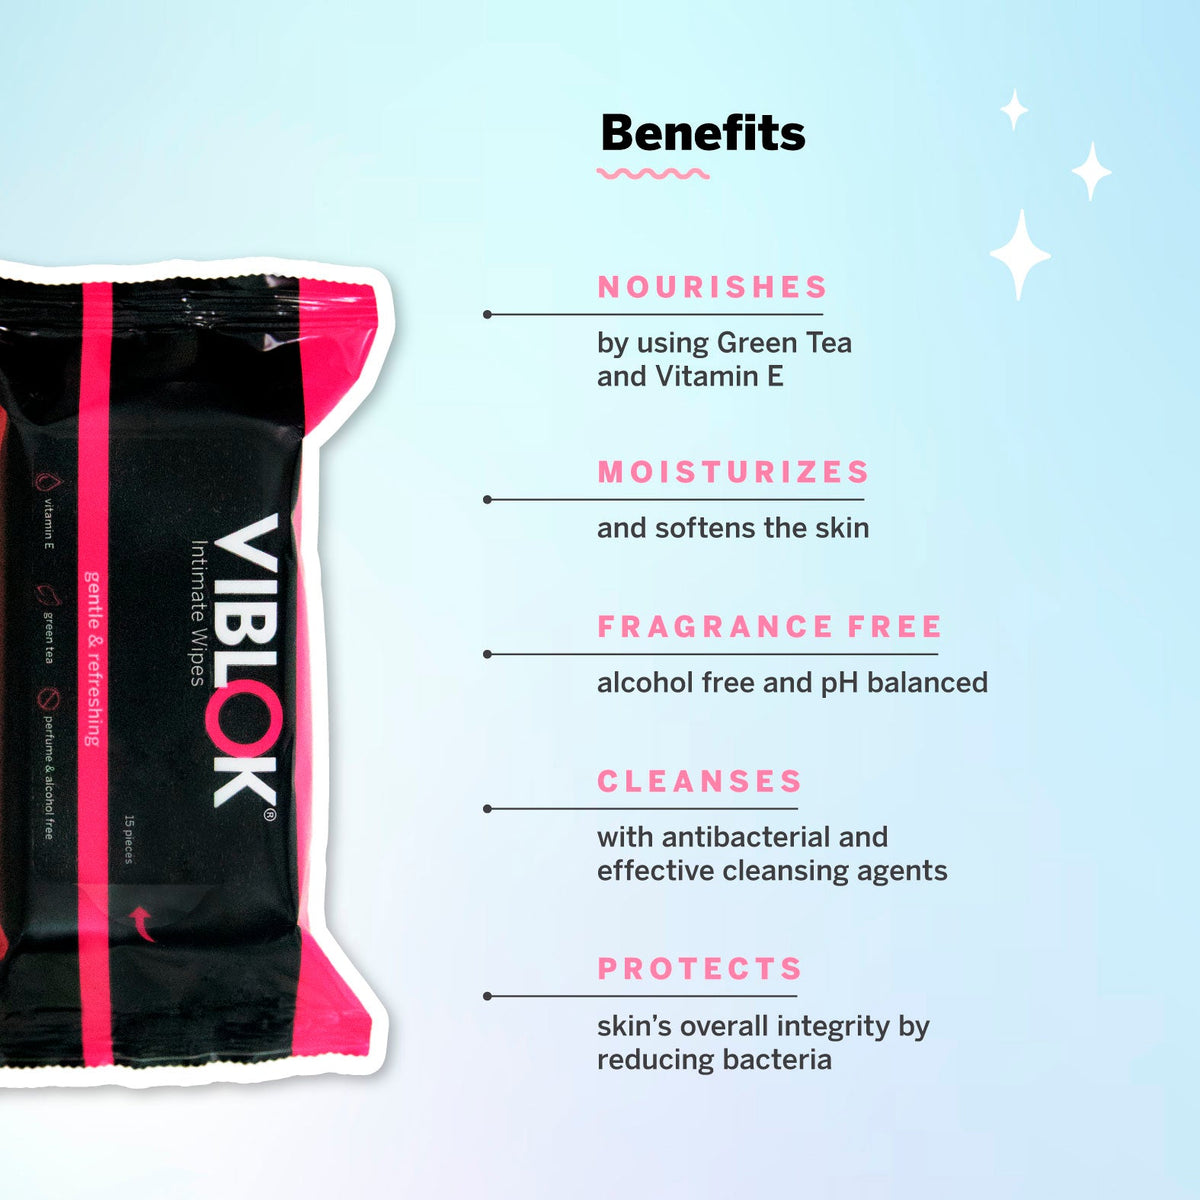 Description of the wipes' benefits. Nourishes, moisturizes, fragrance free, cleanses, protects, vitamin E, green tea, pH balanced, antibacterial